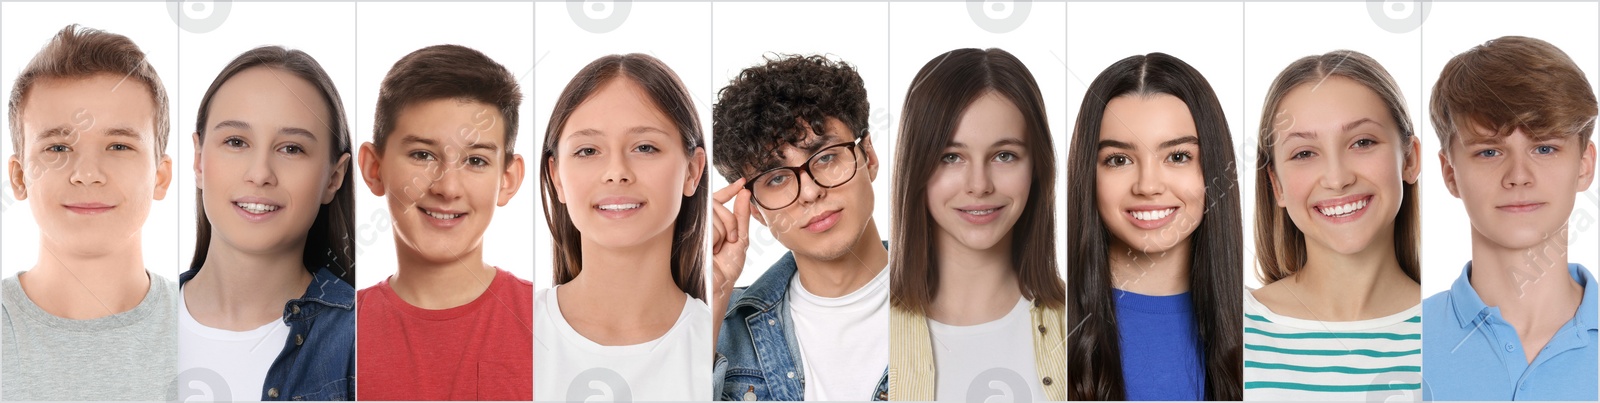 Image of Portraits of teenagers on white background, collage design